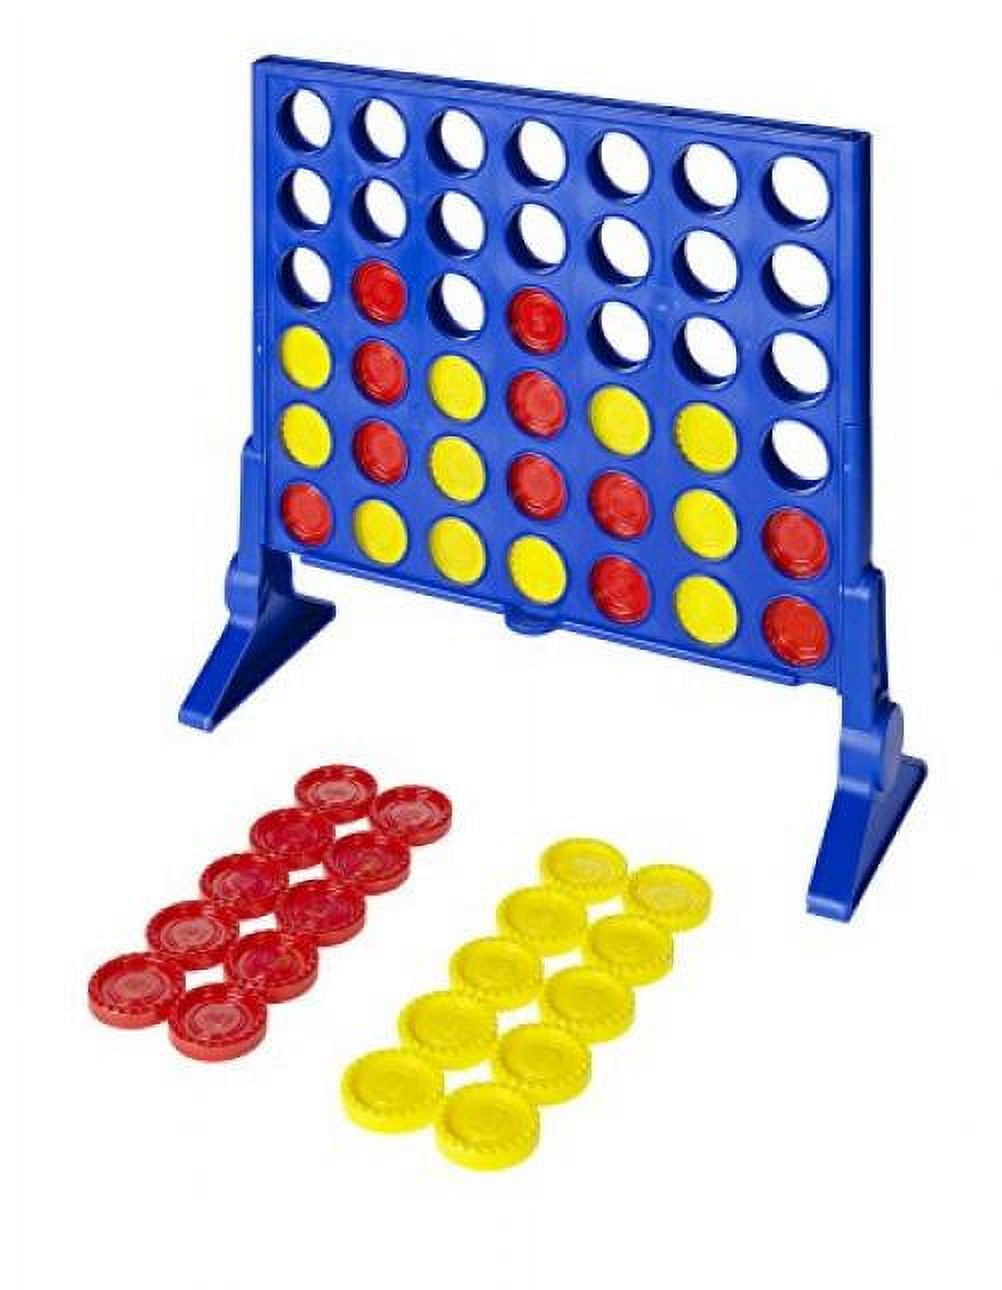 Hasbro Connect 4 Game - image 1 of 4